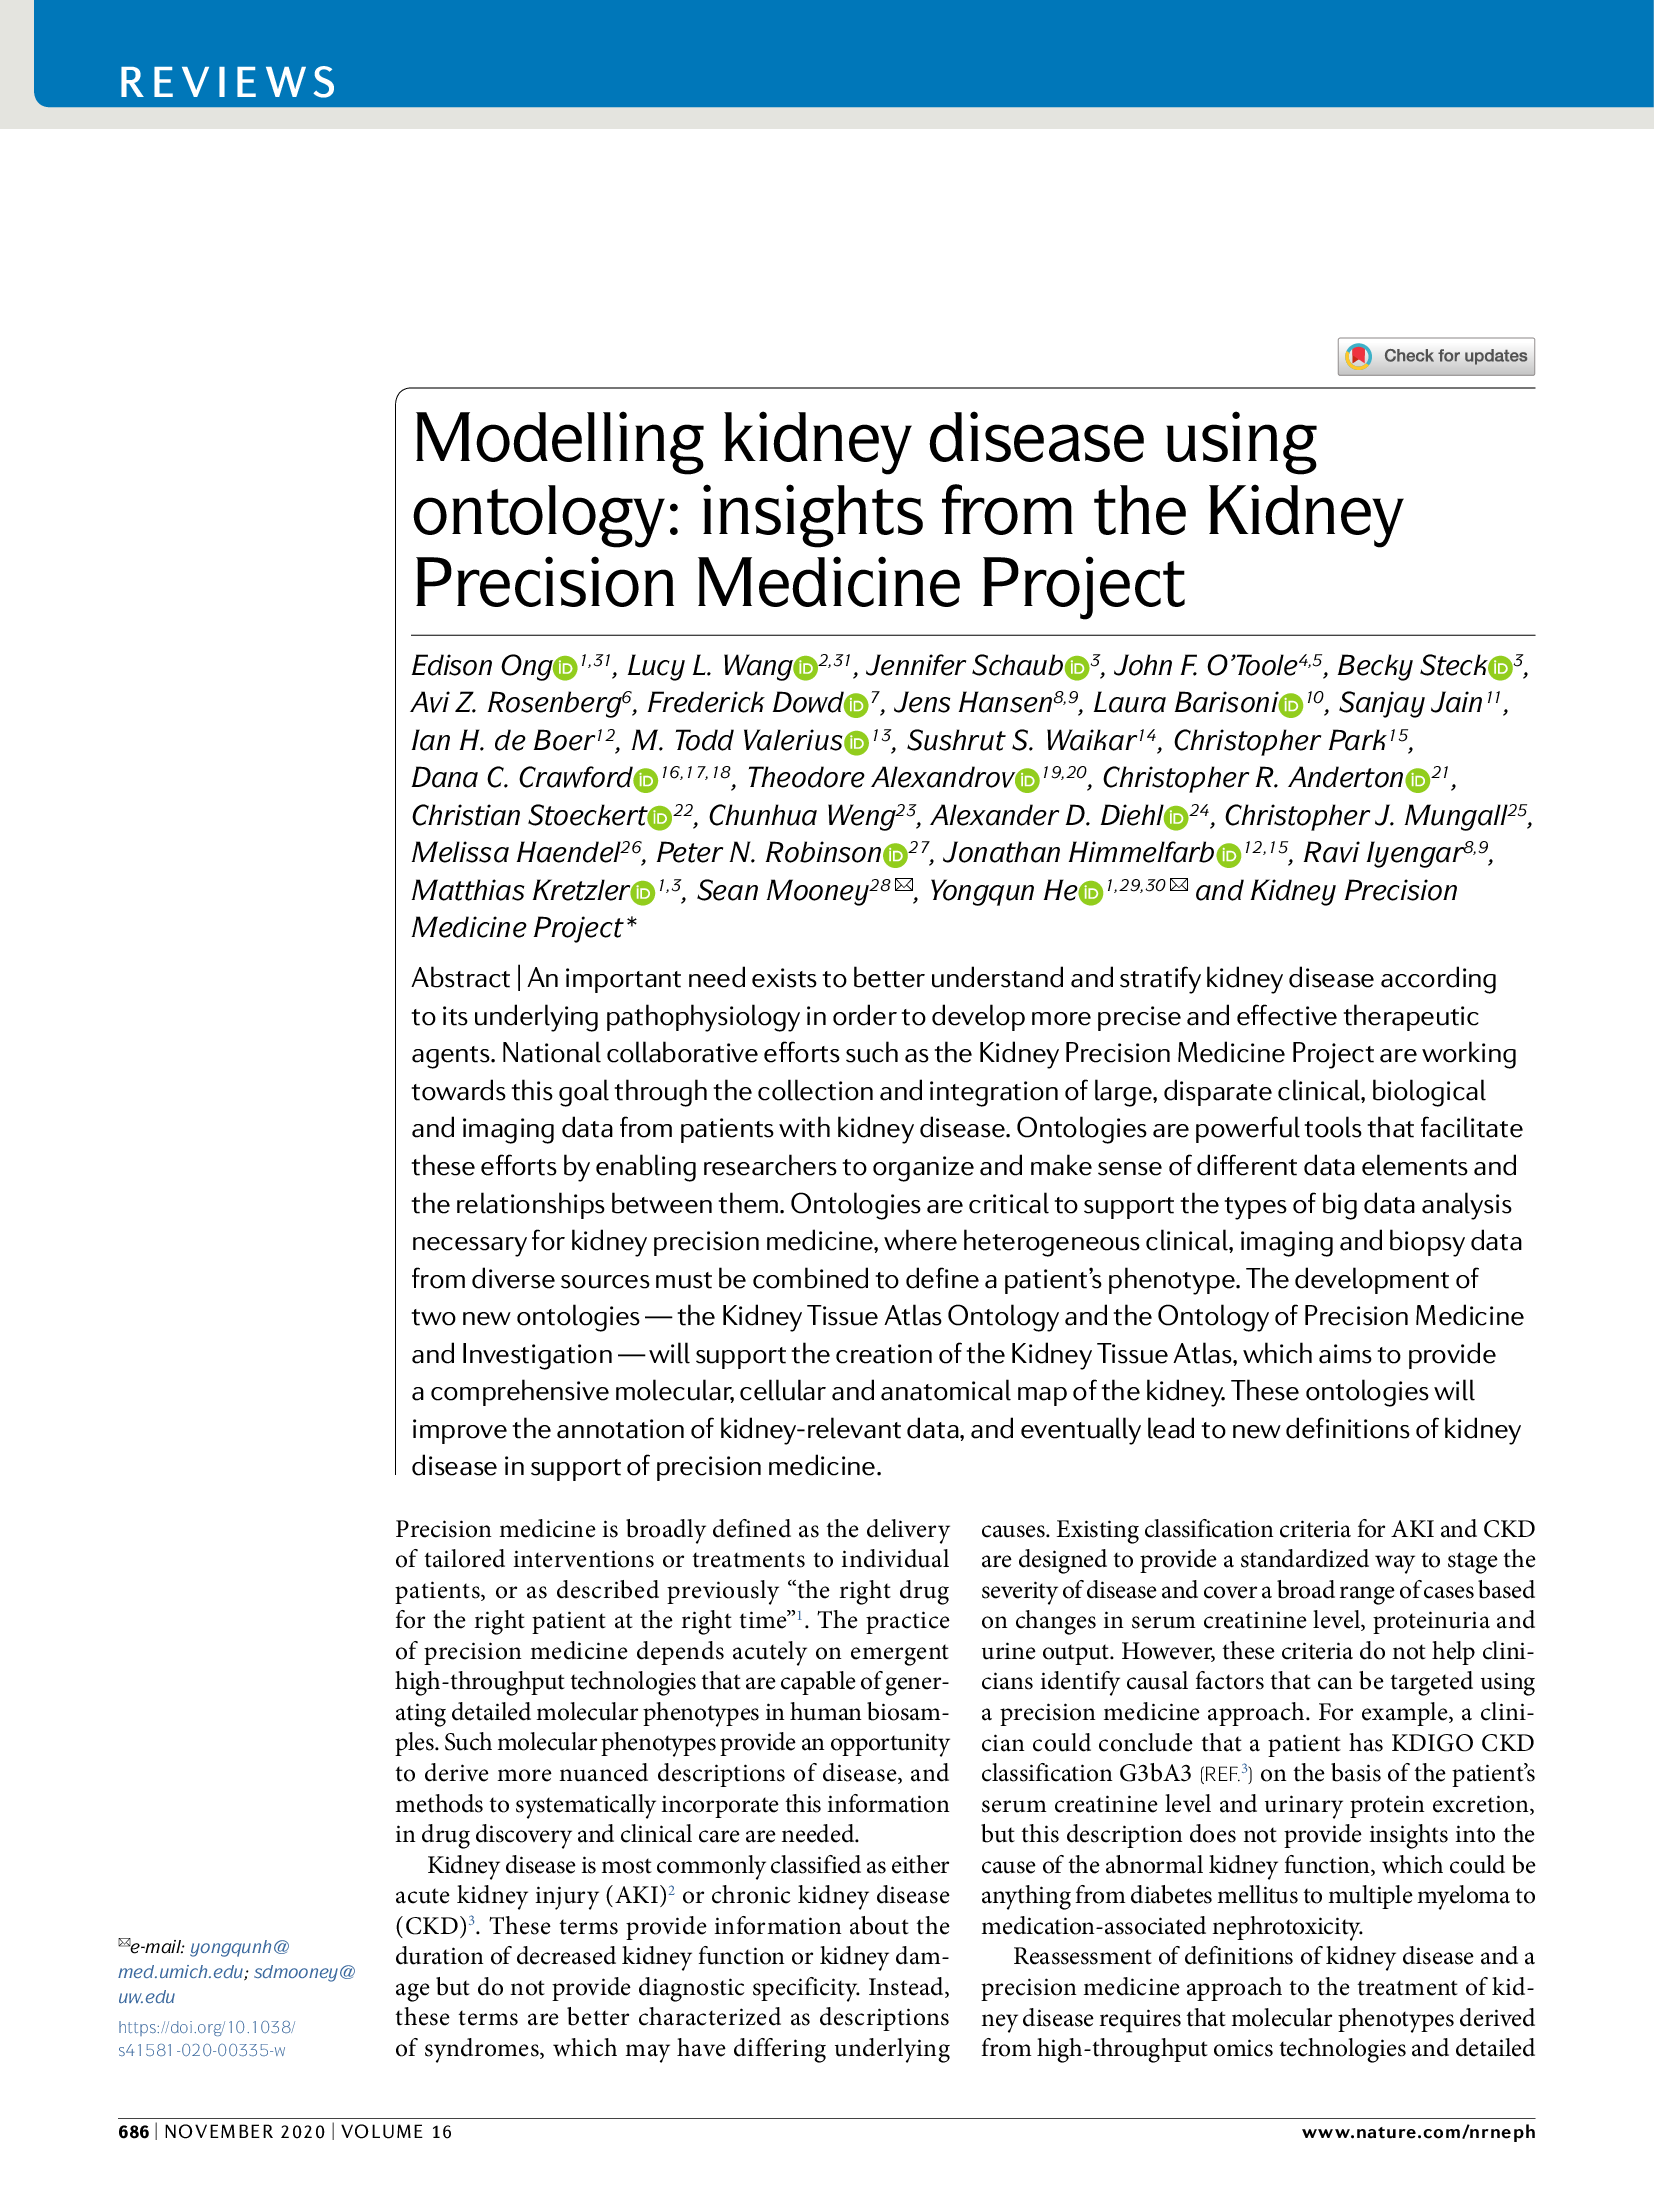 Modelling kidney disease using ontology: insights from the Kidney Precision Medicine Project